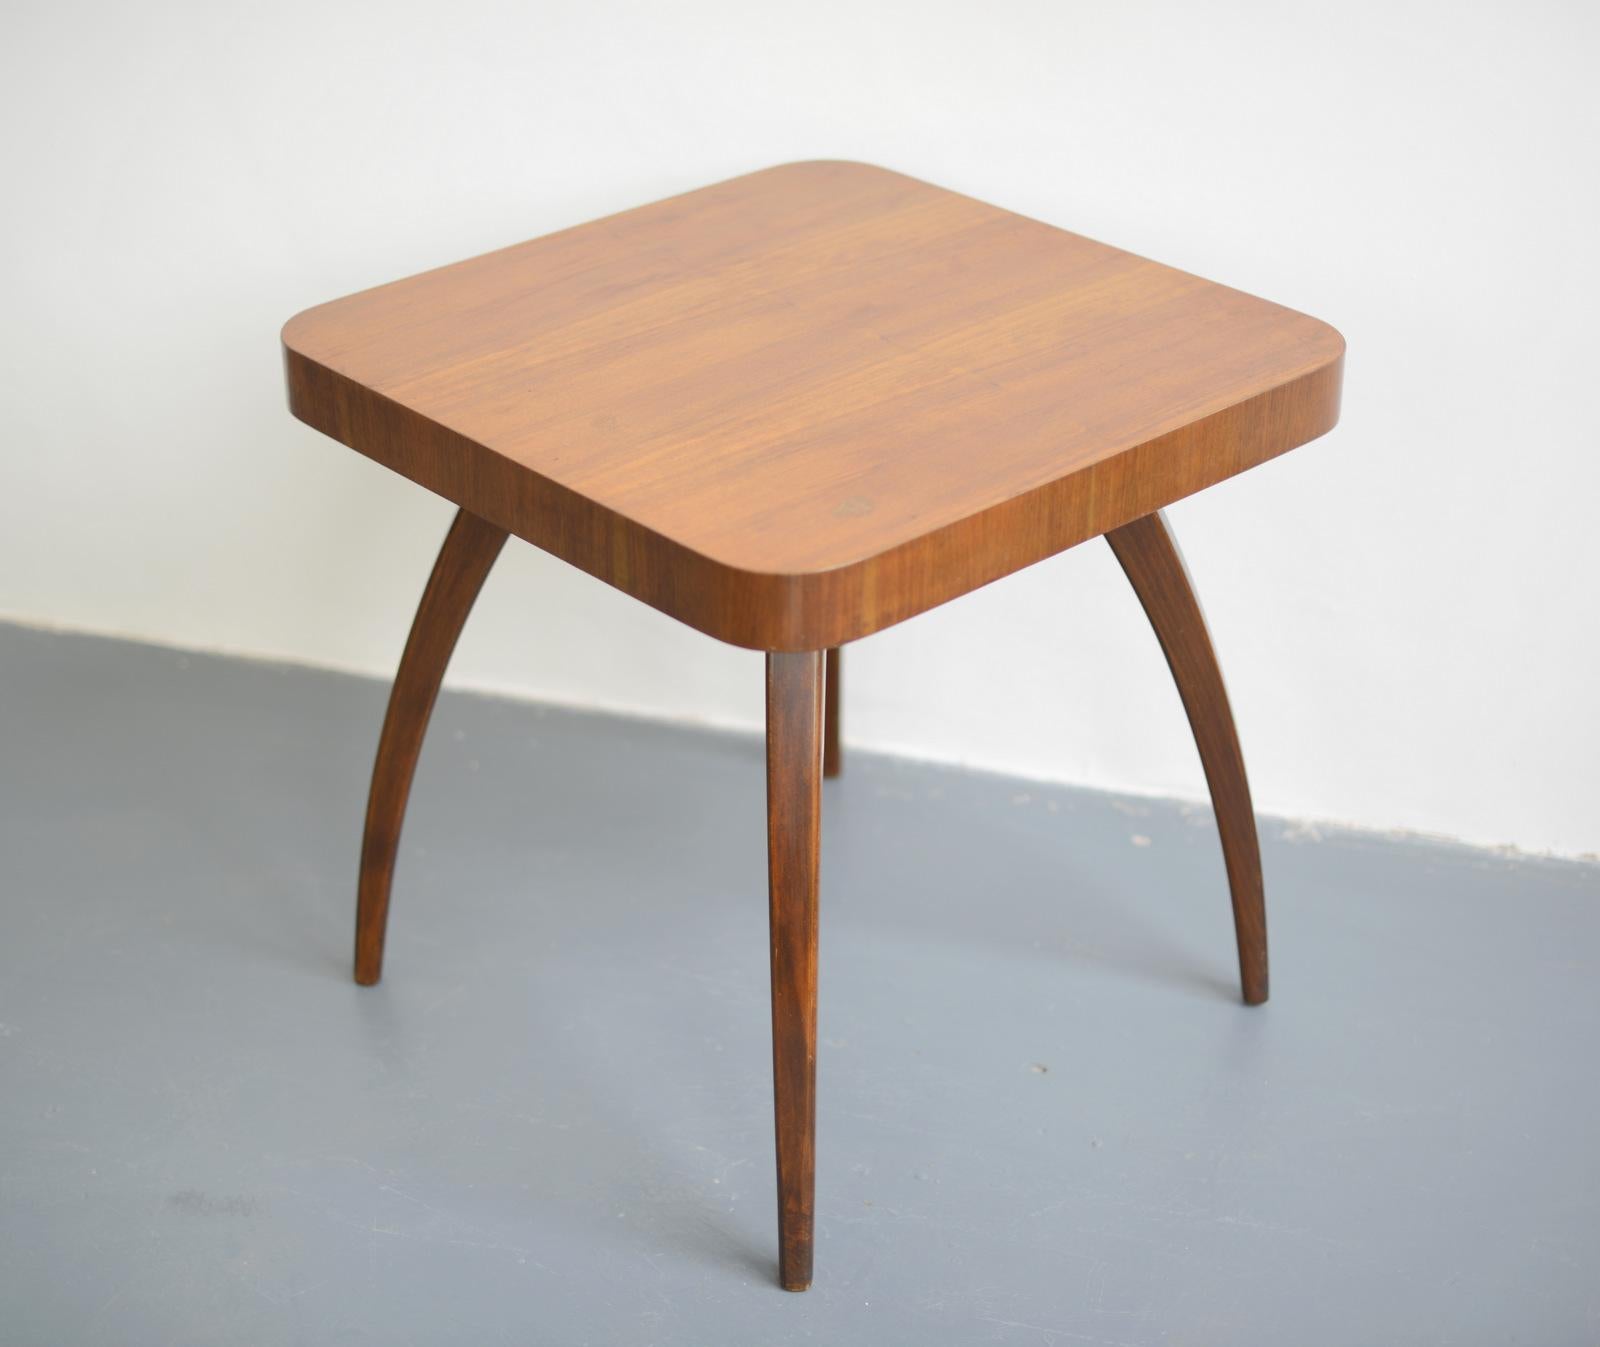 Spider Table By Jindrich Halabala, circa 1940s

- Curved beech legs with veneered top
- Designed by Jindrich Halabala
- Czech ~ 1940s
- Measures: 65cm x 65cm x 65cm

Jindrich Halabala

Jindrich Halabala helped create a new mass-market